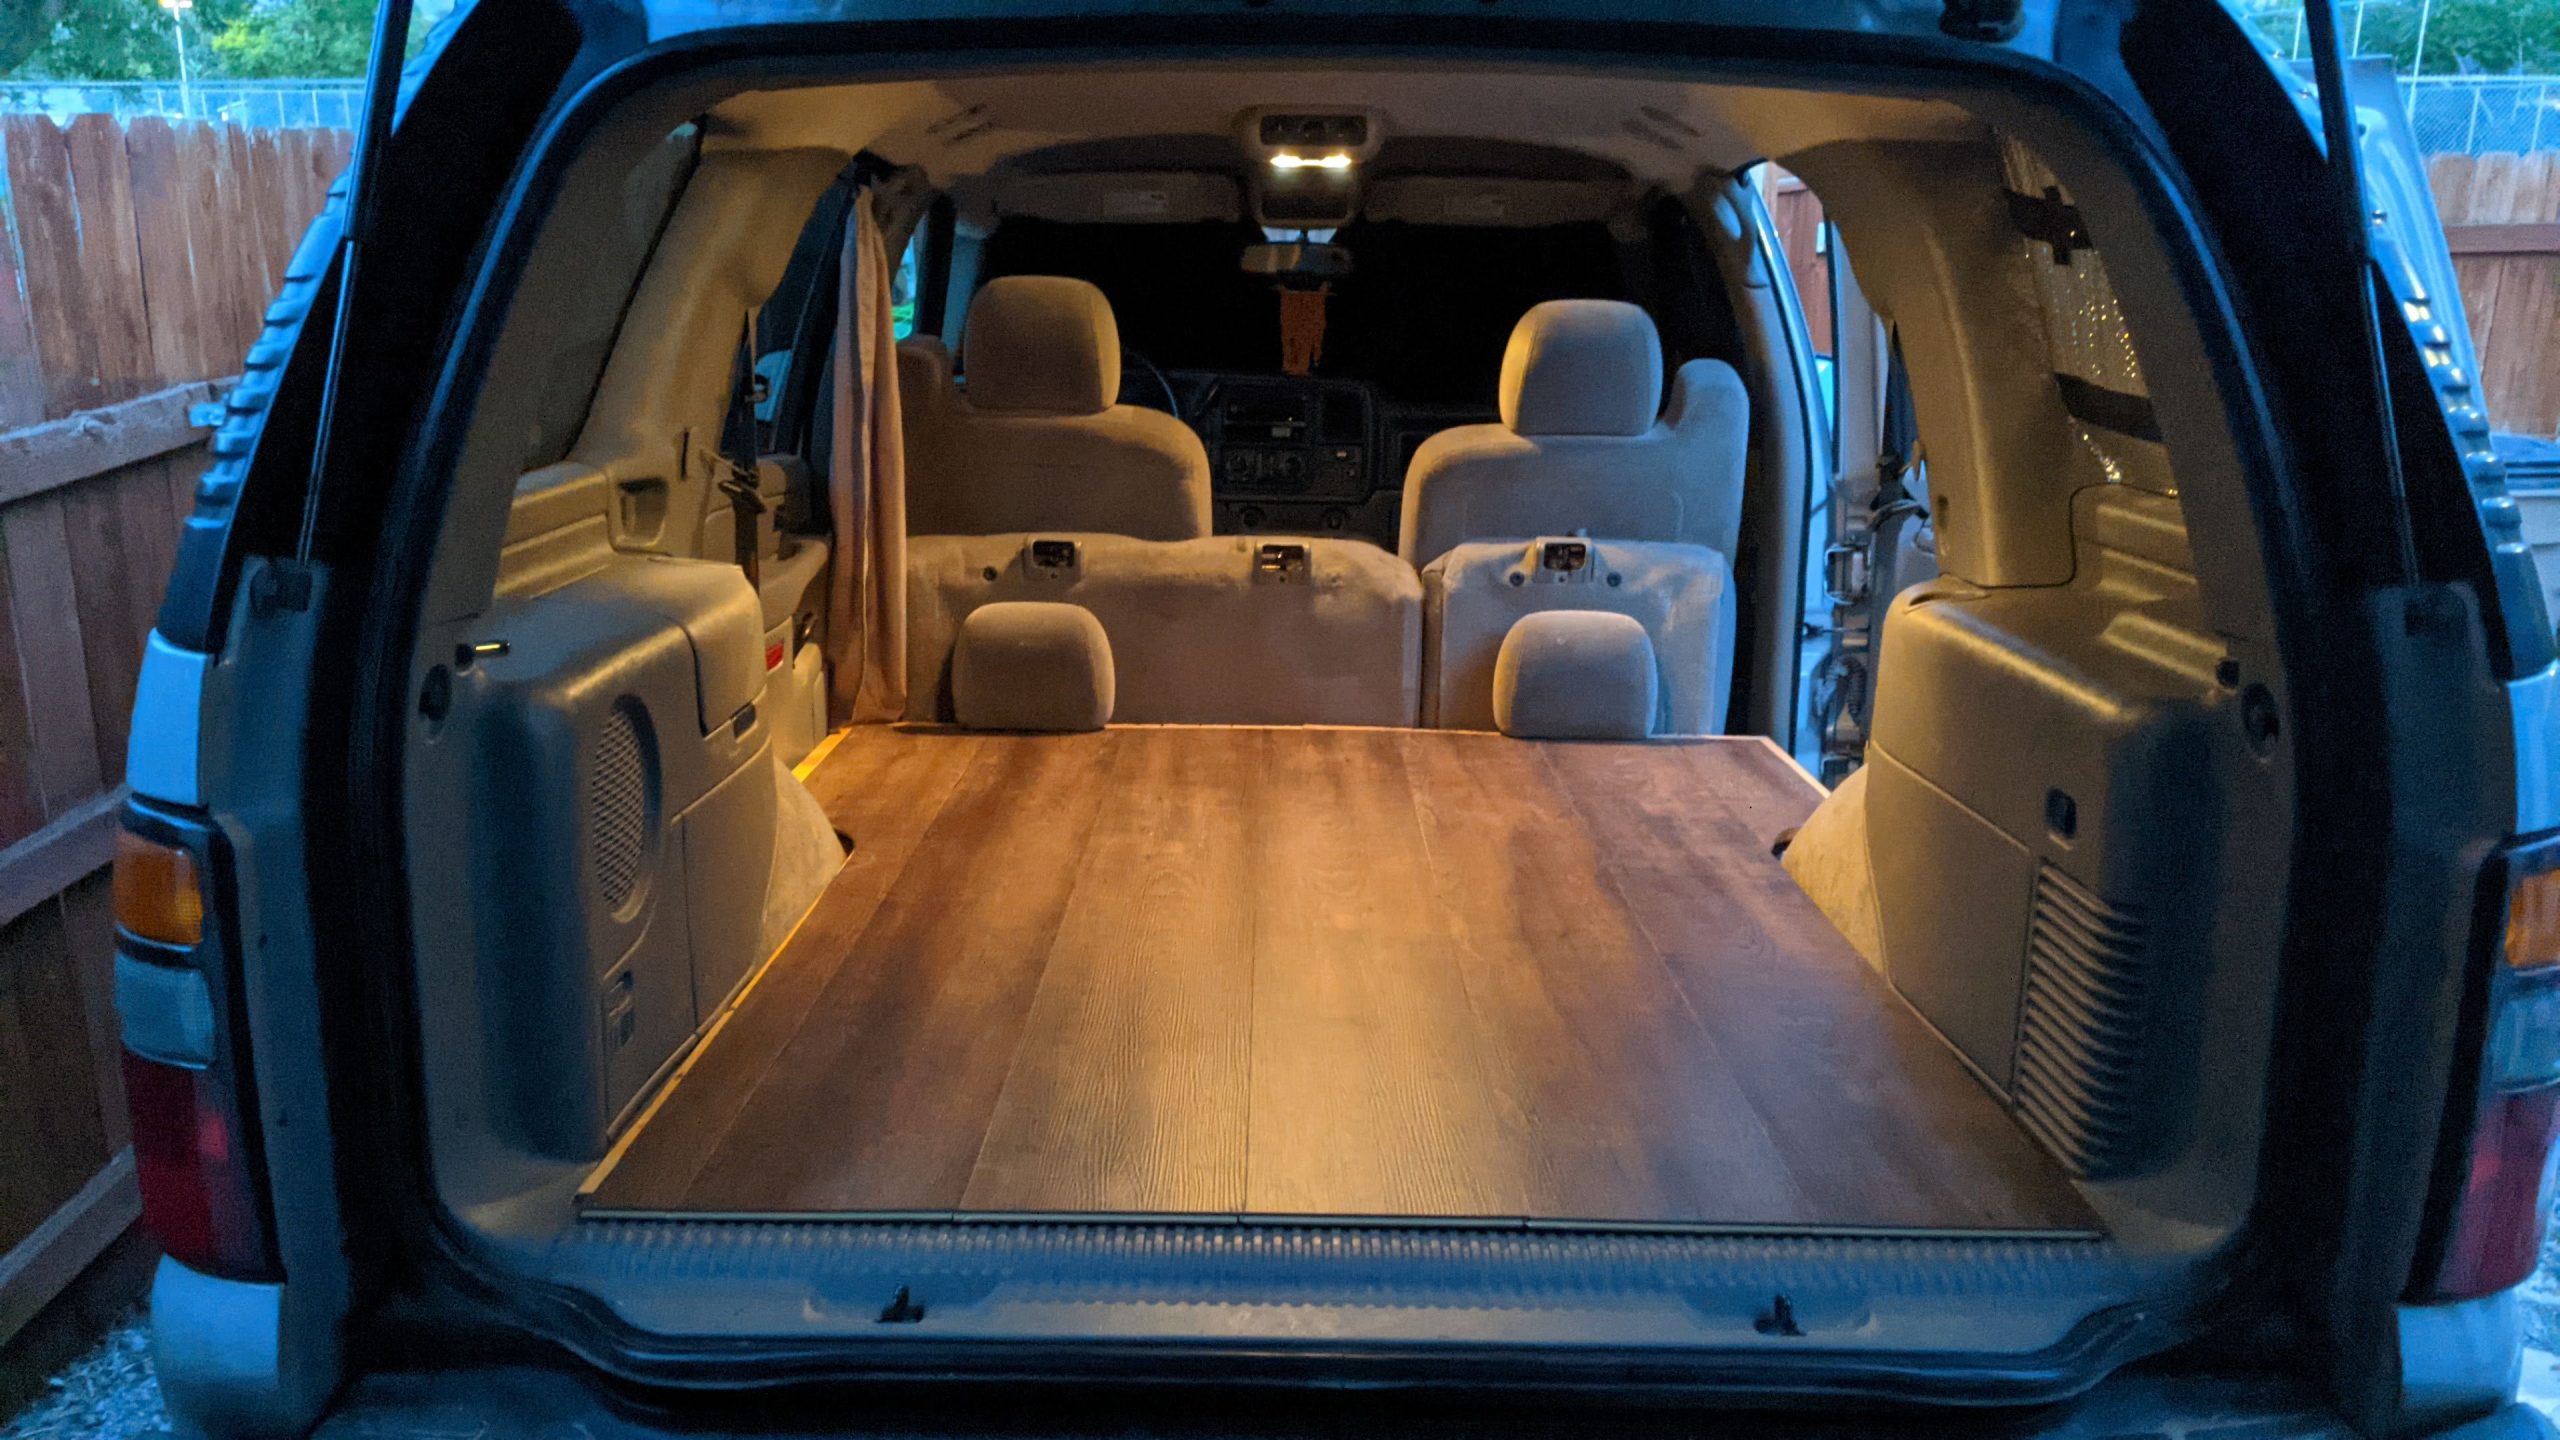 You are currently viewing Installing a Wood Floor in my Chevy Tahoe Camper